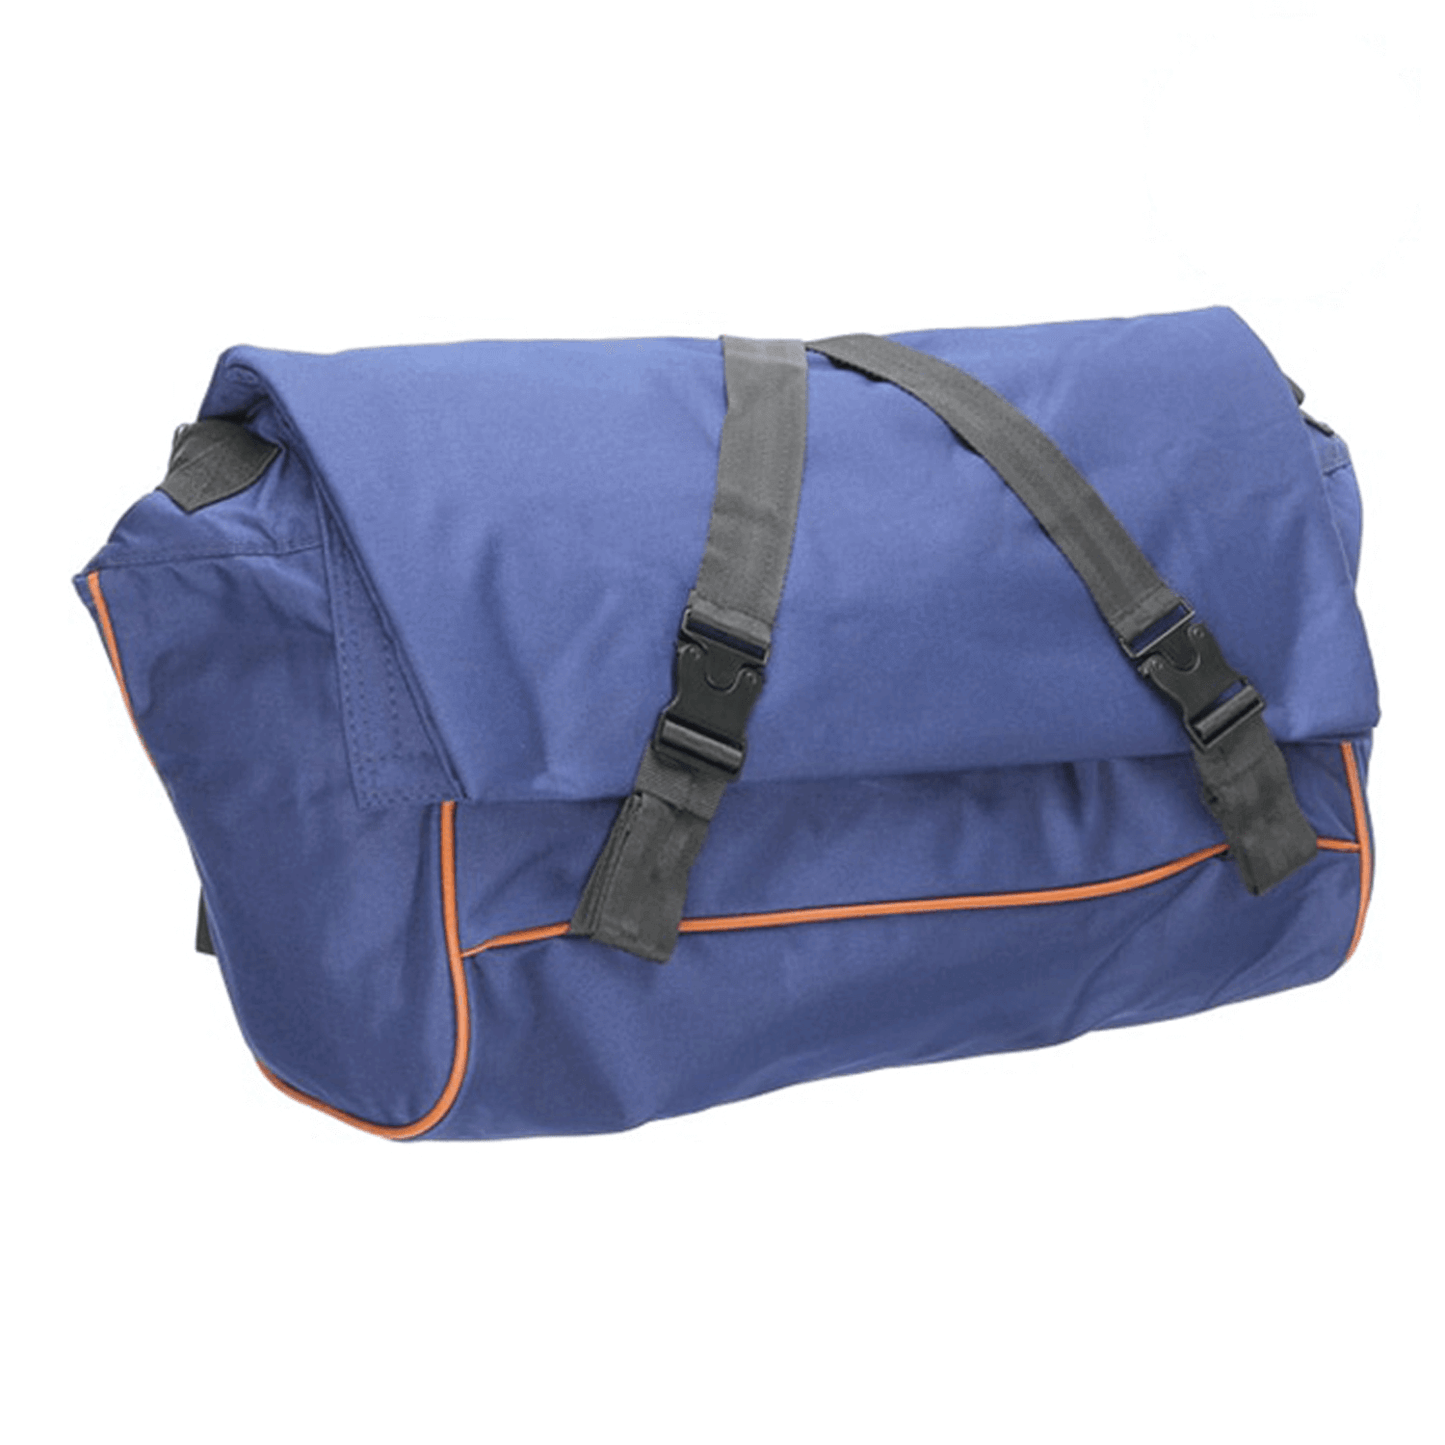 AWOL DAILY Blue Messenger Bag 886153 Harvest & Extraction 853336007911